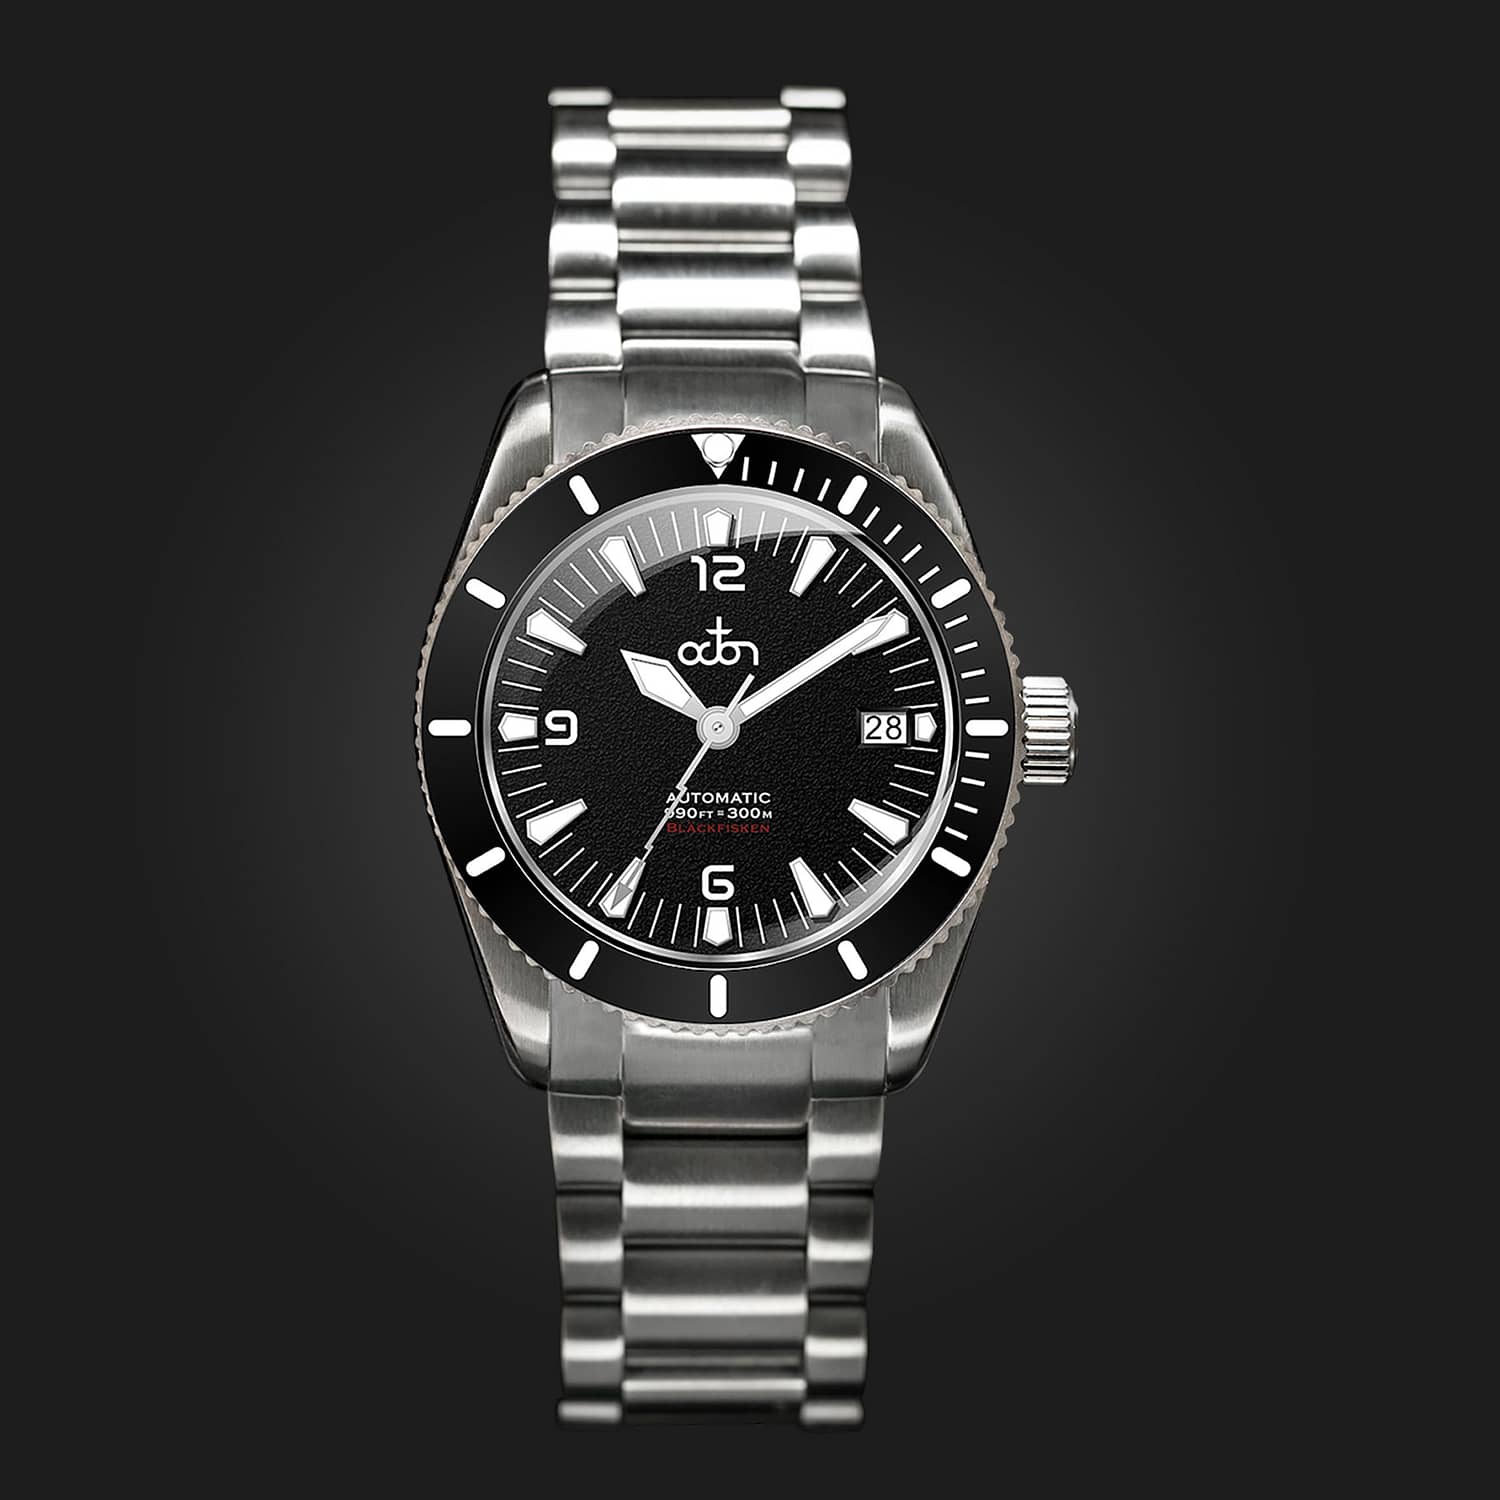 Bläckfisken - Black - Limited Edition Watch (300 pieces) with Stainless Steel Bracelet